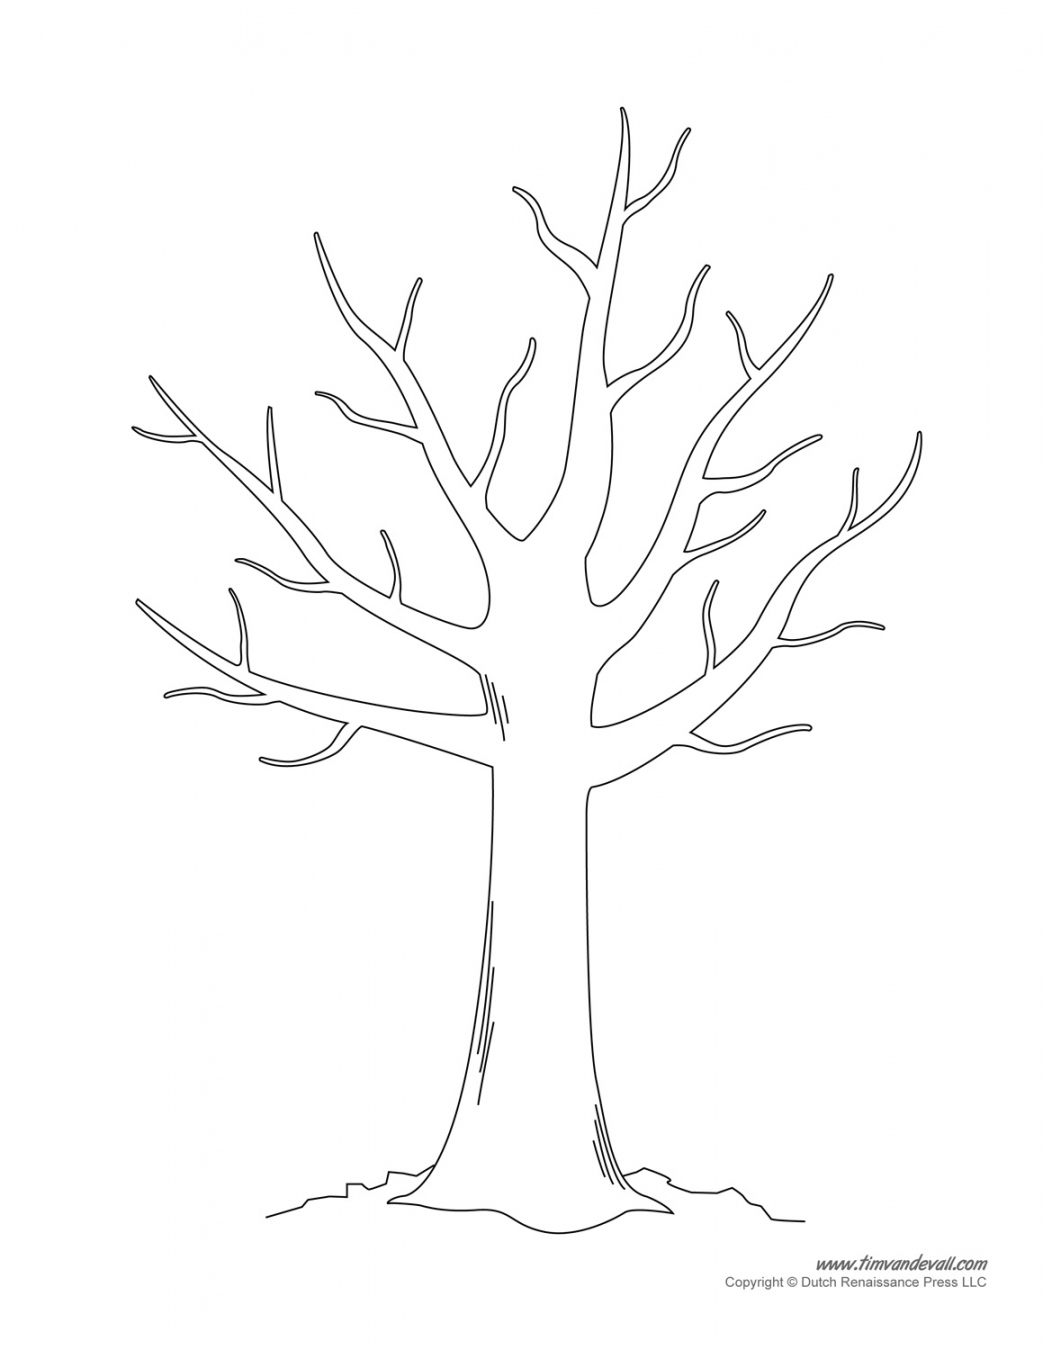 Tree Templates  Tree Printables - FREE Printables - Tree Cut Out Template